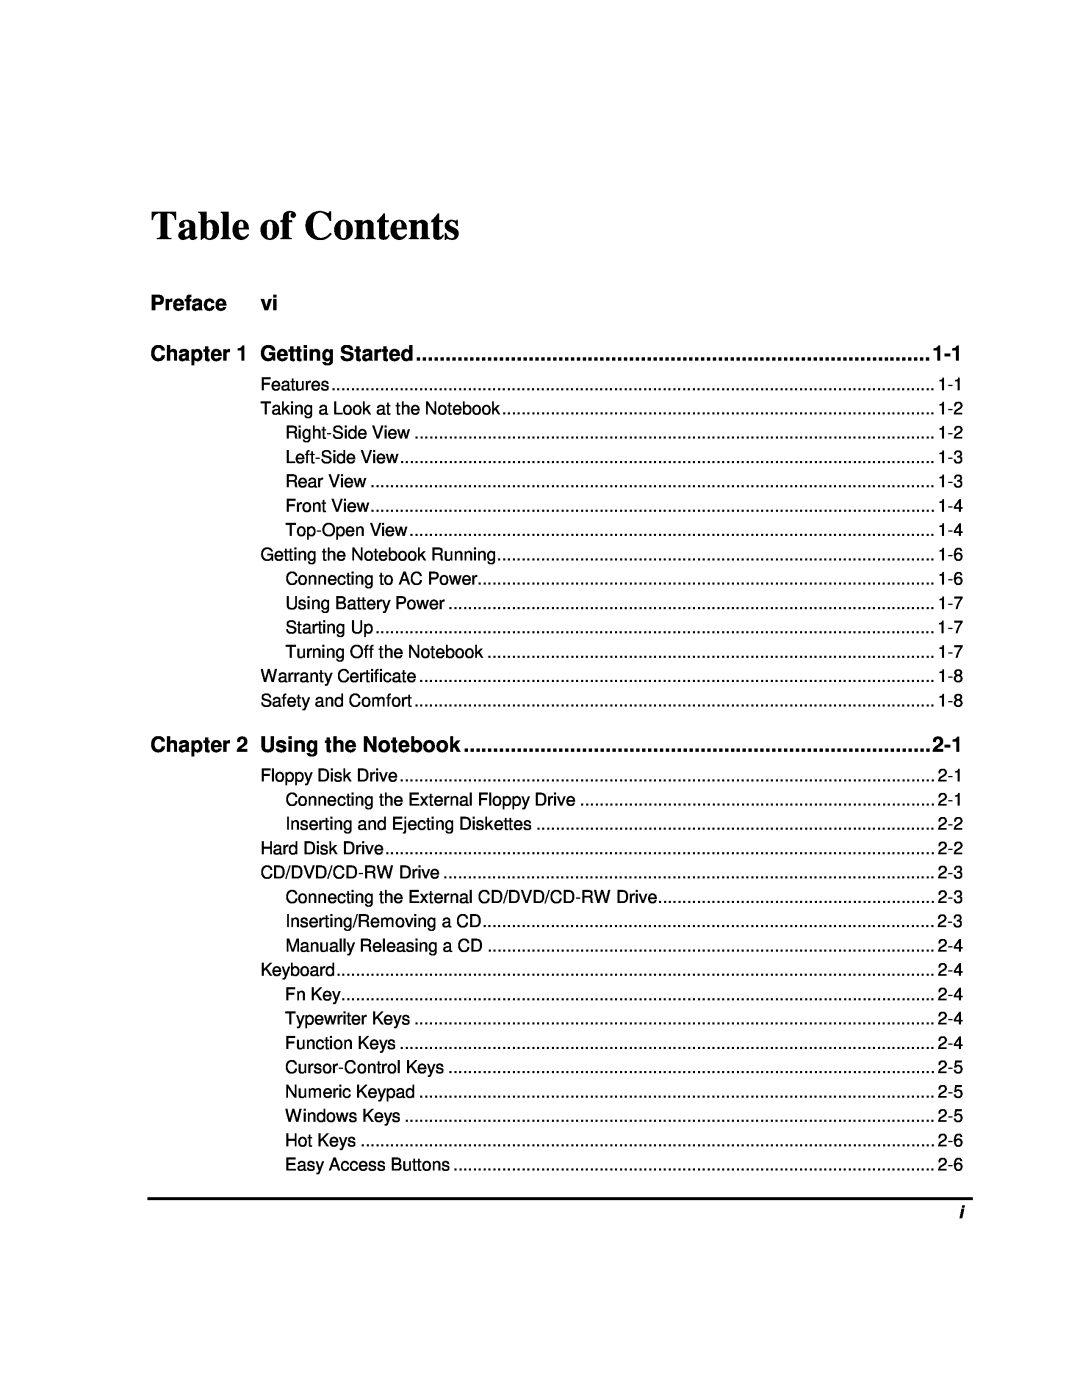 HP 80XL302 manual Table of Contents, Preface, Chapter, Getting Started, Using the Notebook 